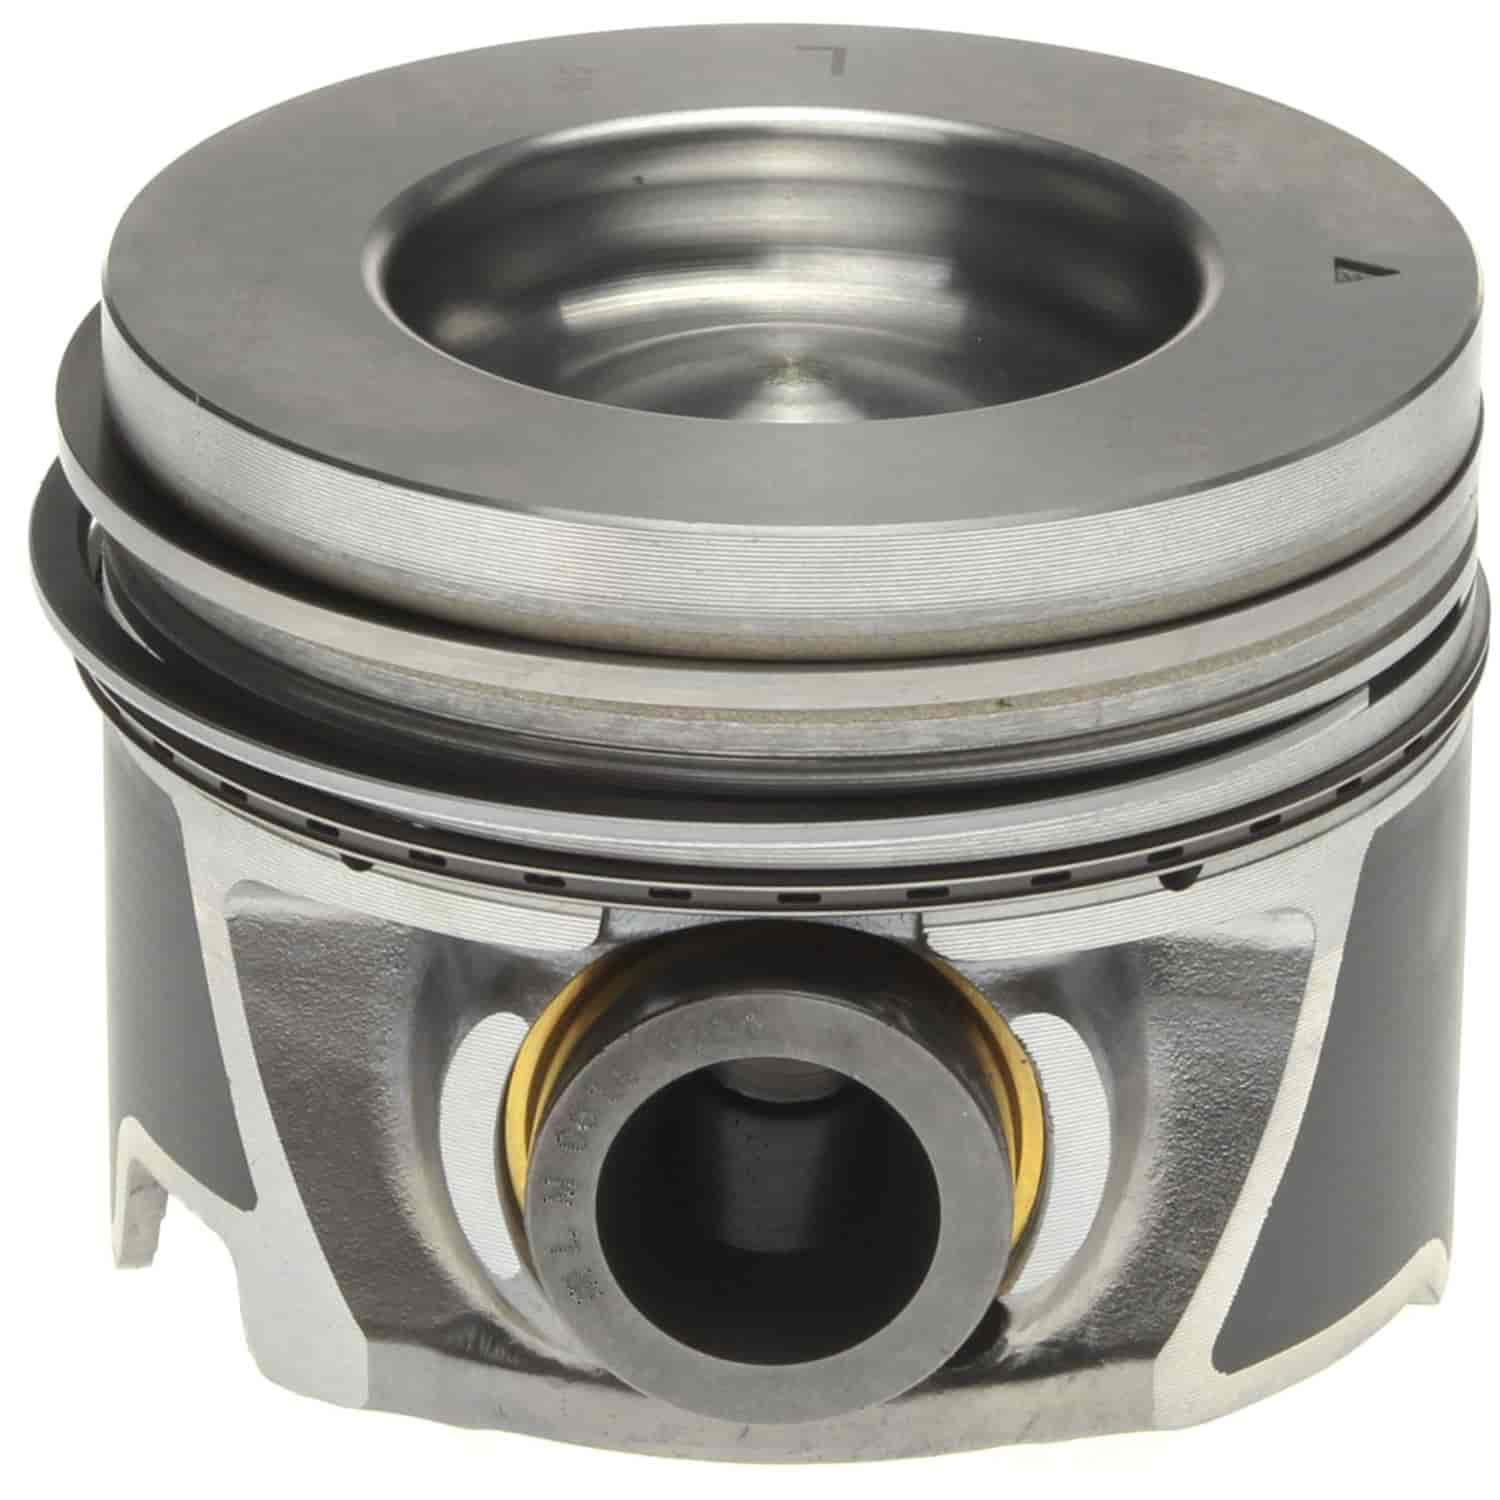 Piston and Rings Set 2006-2010 Chevy/GMC Duramax Diesel V8 6.6L Left Bank with 4.085" Bore (+.030")